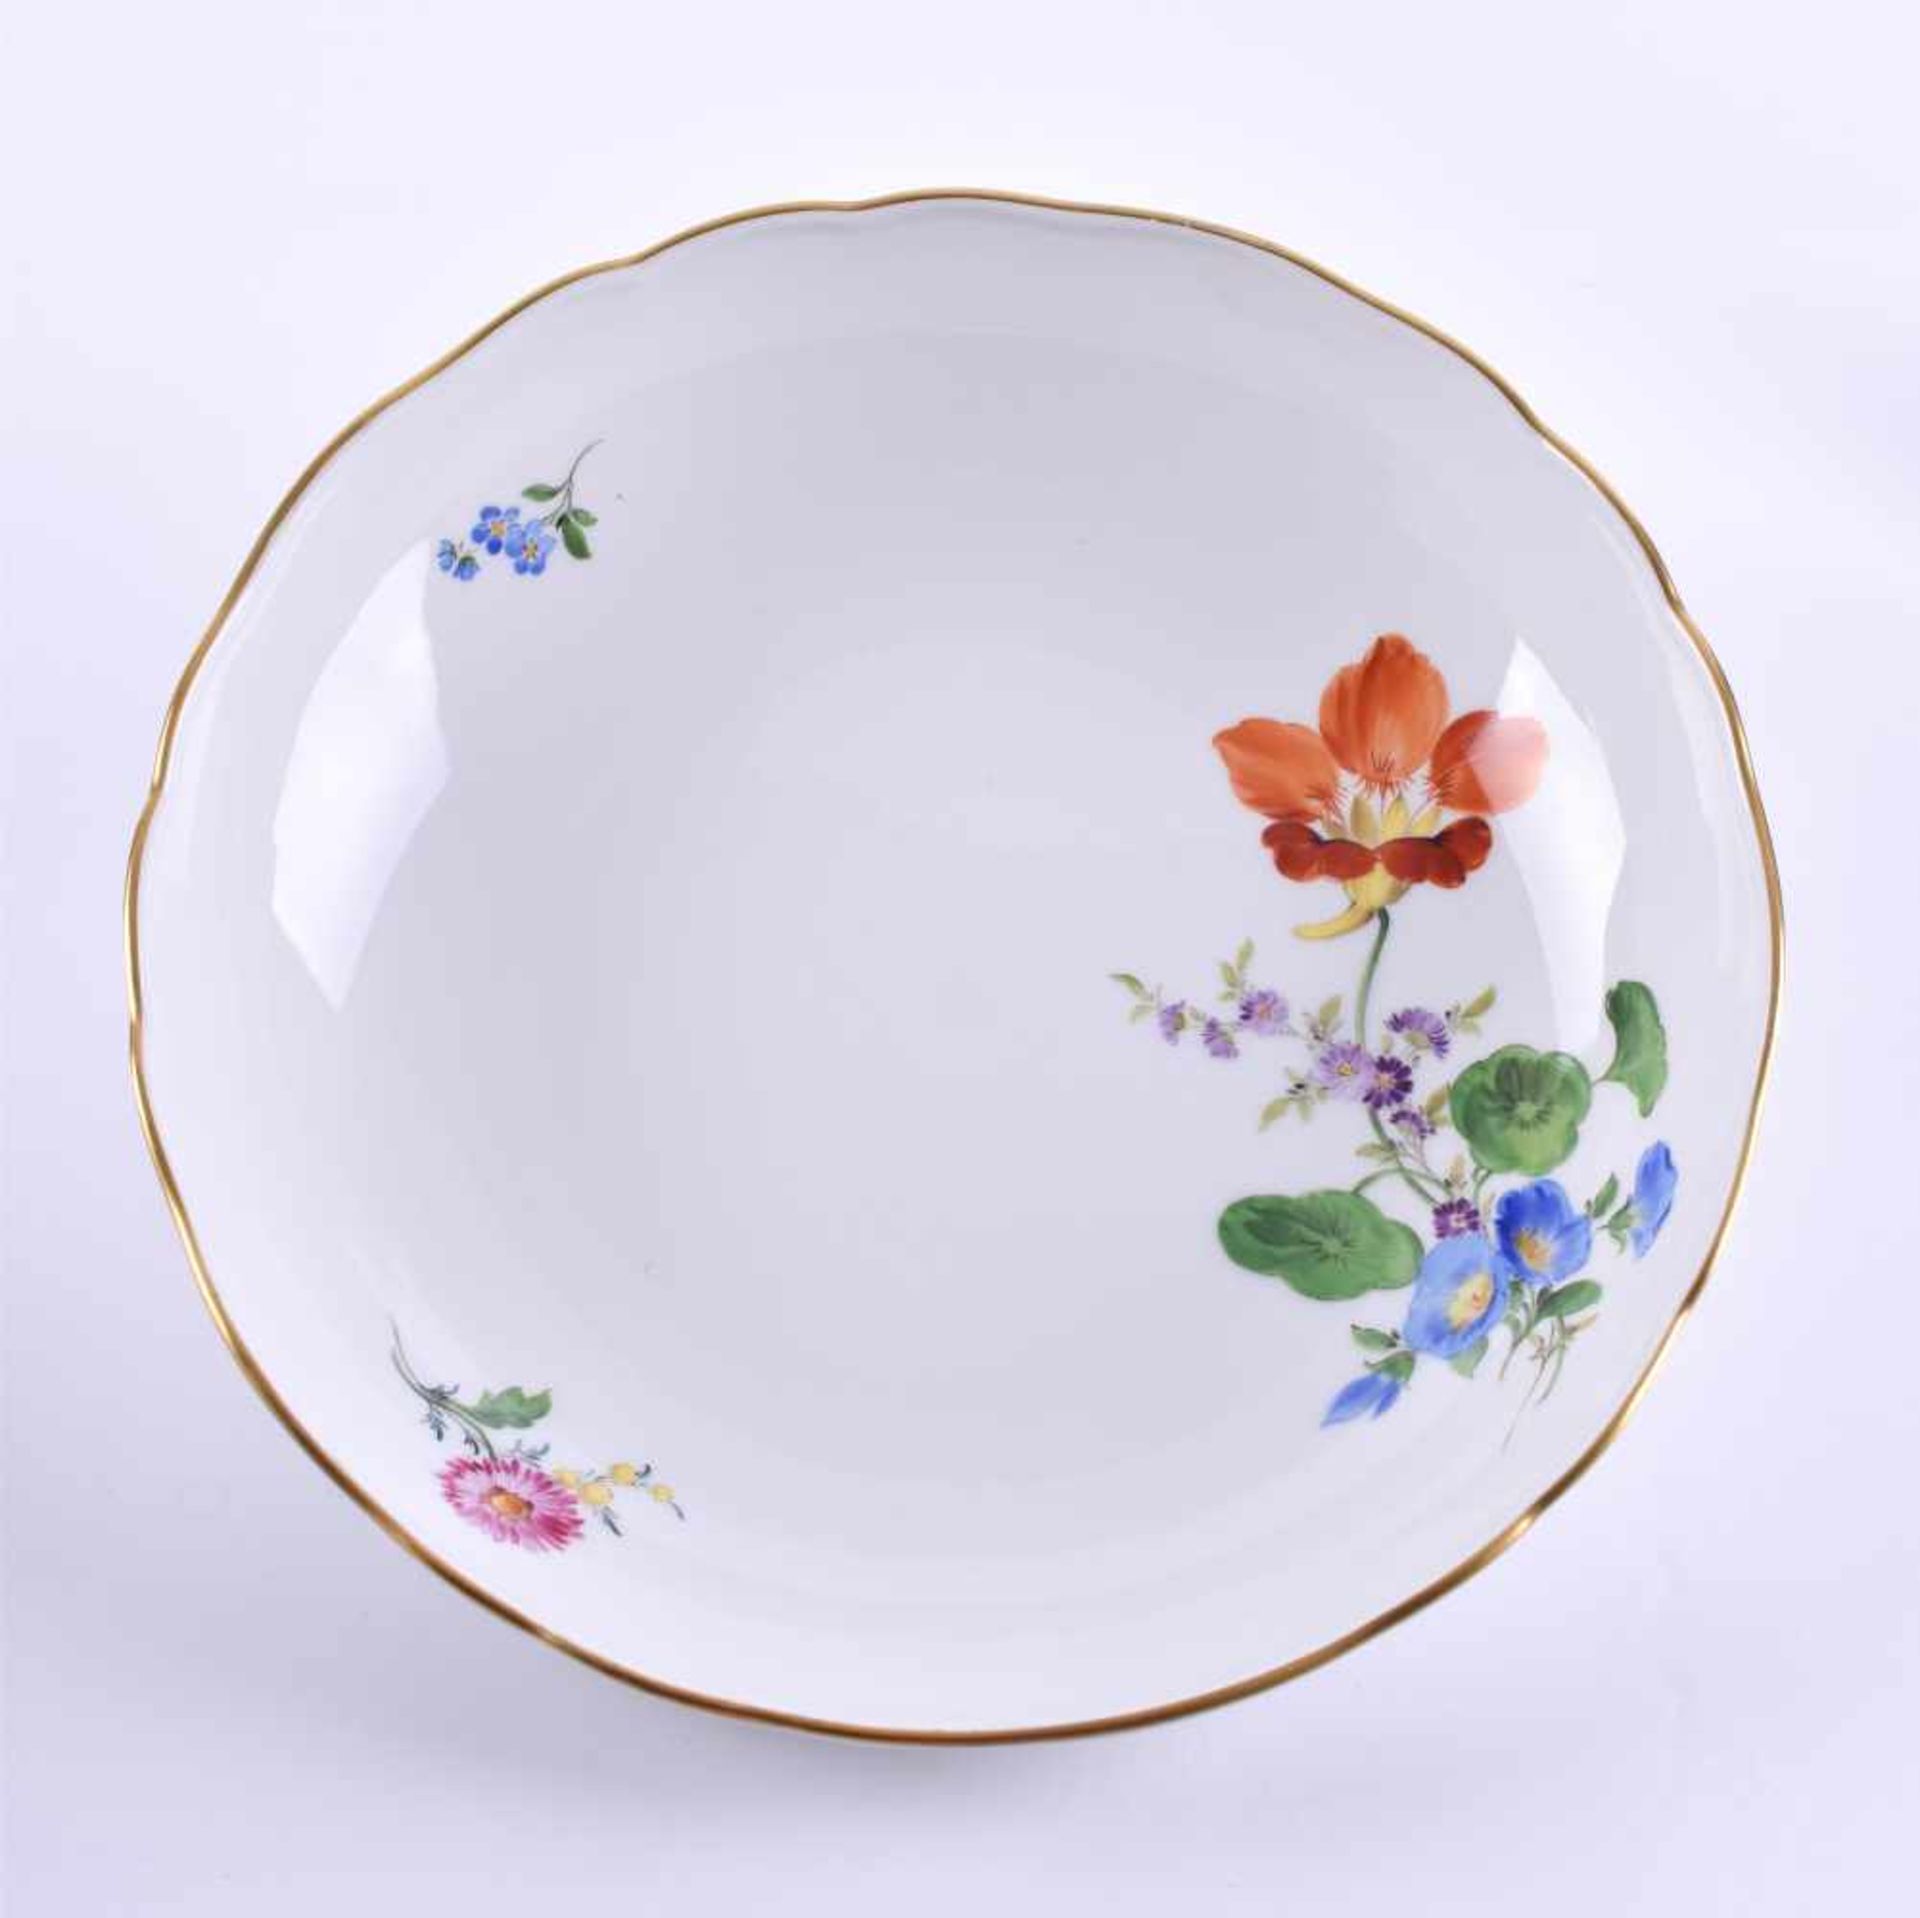 Fruit bowl Meissencolored and gold painted, decor with German flower bouquet, blue sword mark, 1st